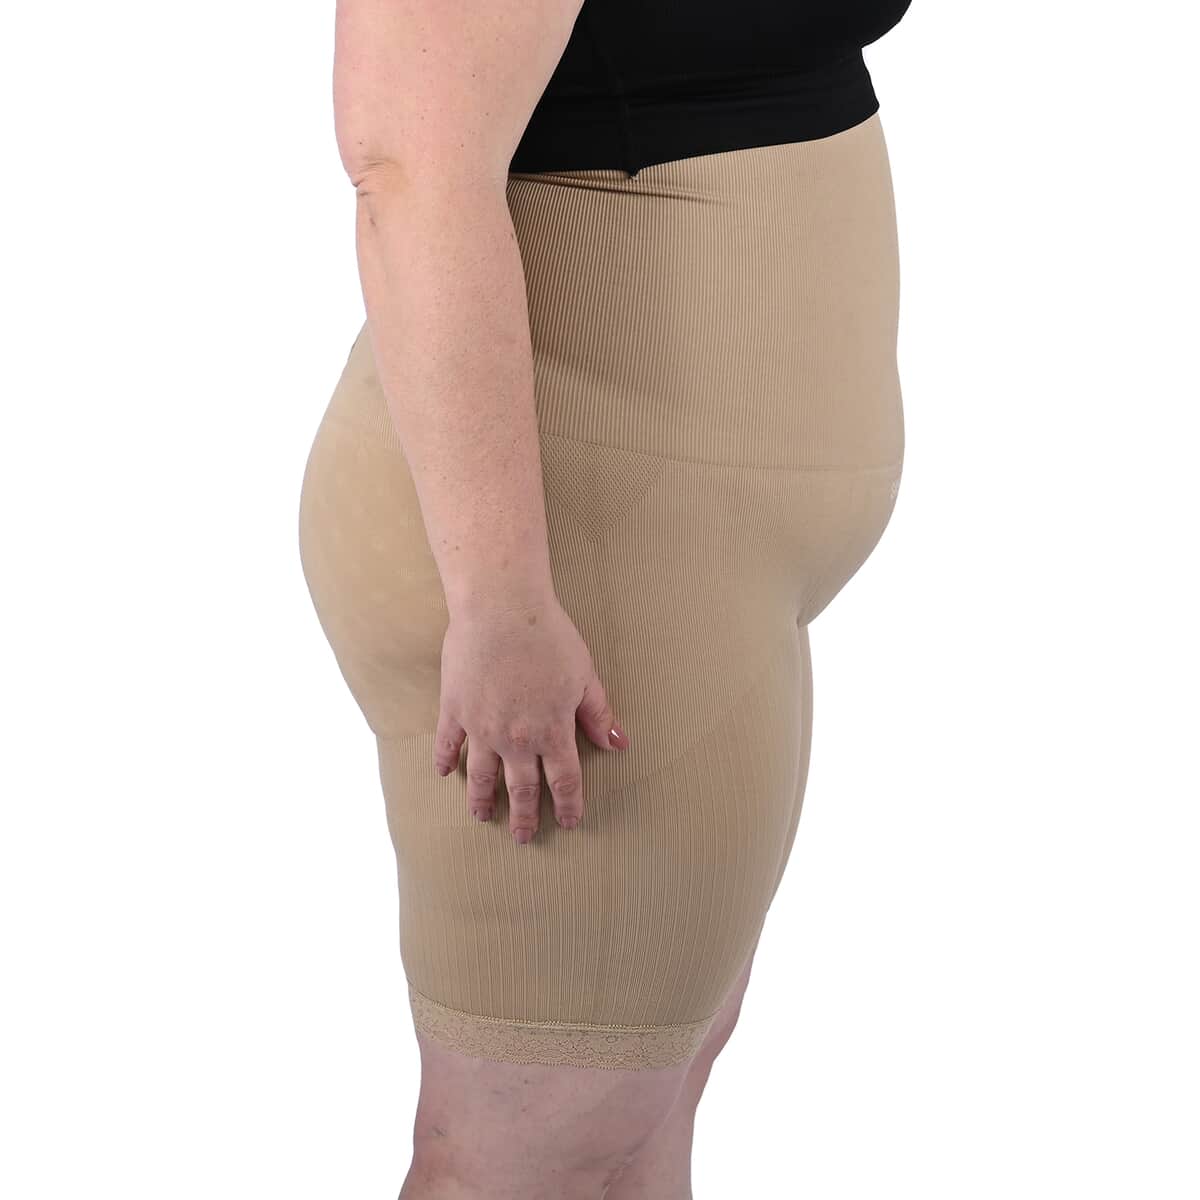 SANKOM Patent Classic Shapers with Lace - XXXL/Tan and White image number 2